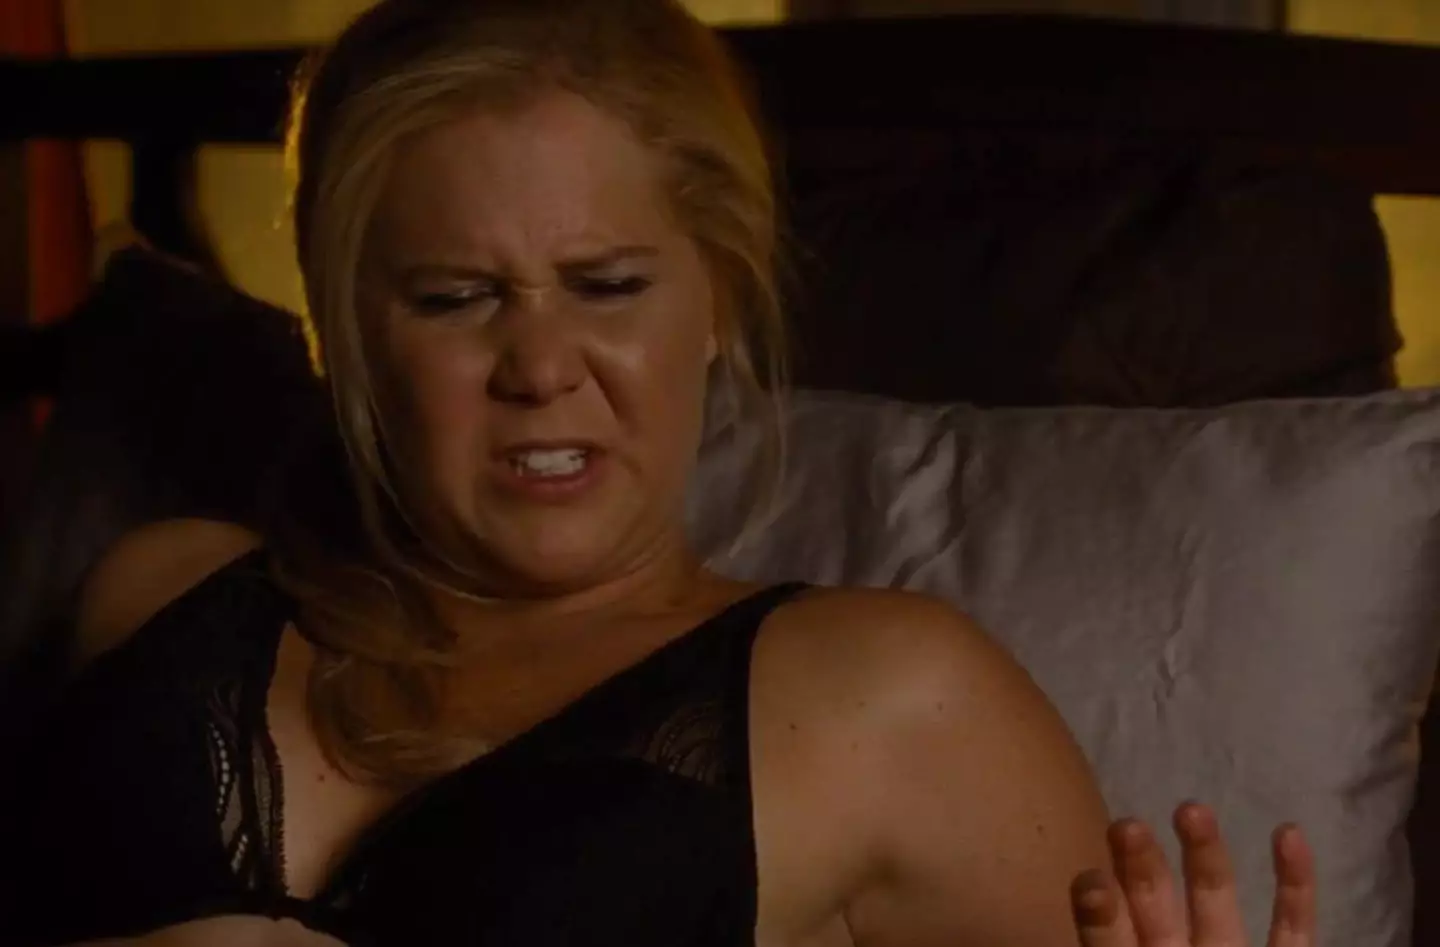 Amy Schumer couldn't help but joke about her sex scene with John Cena in Trainwreck (2015).